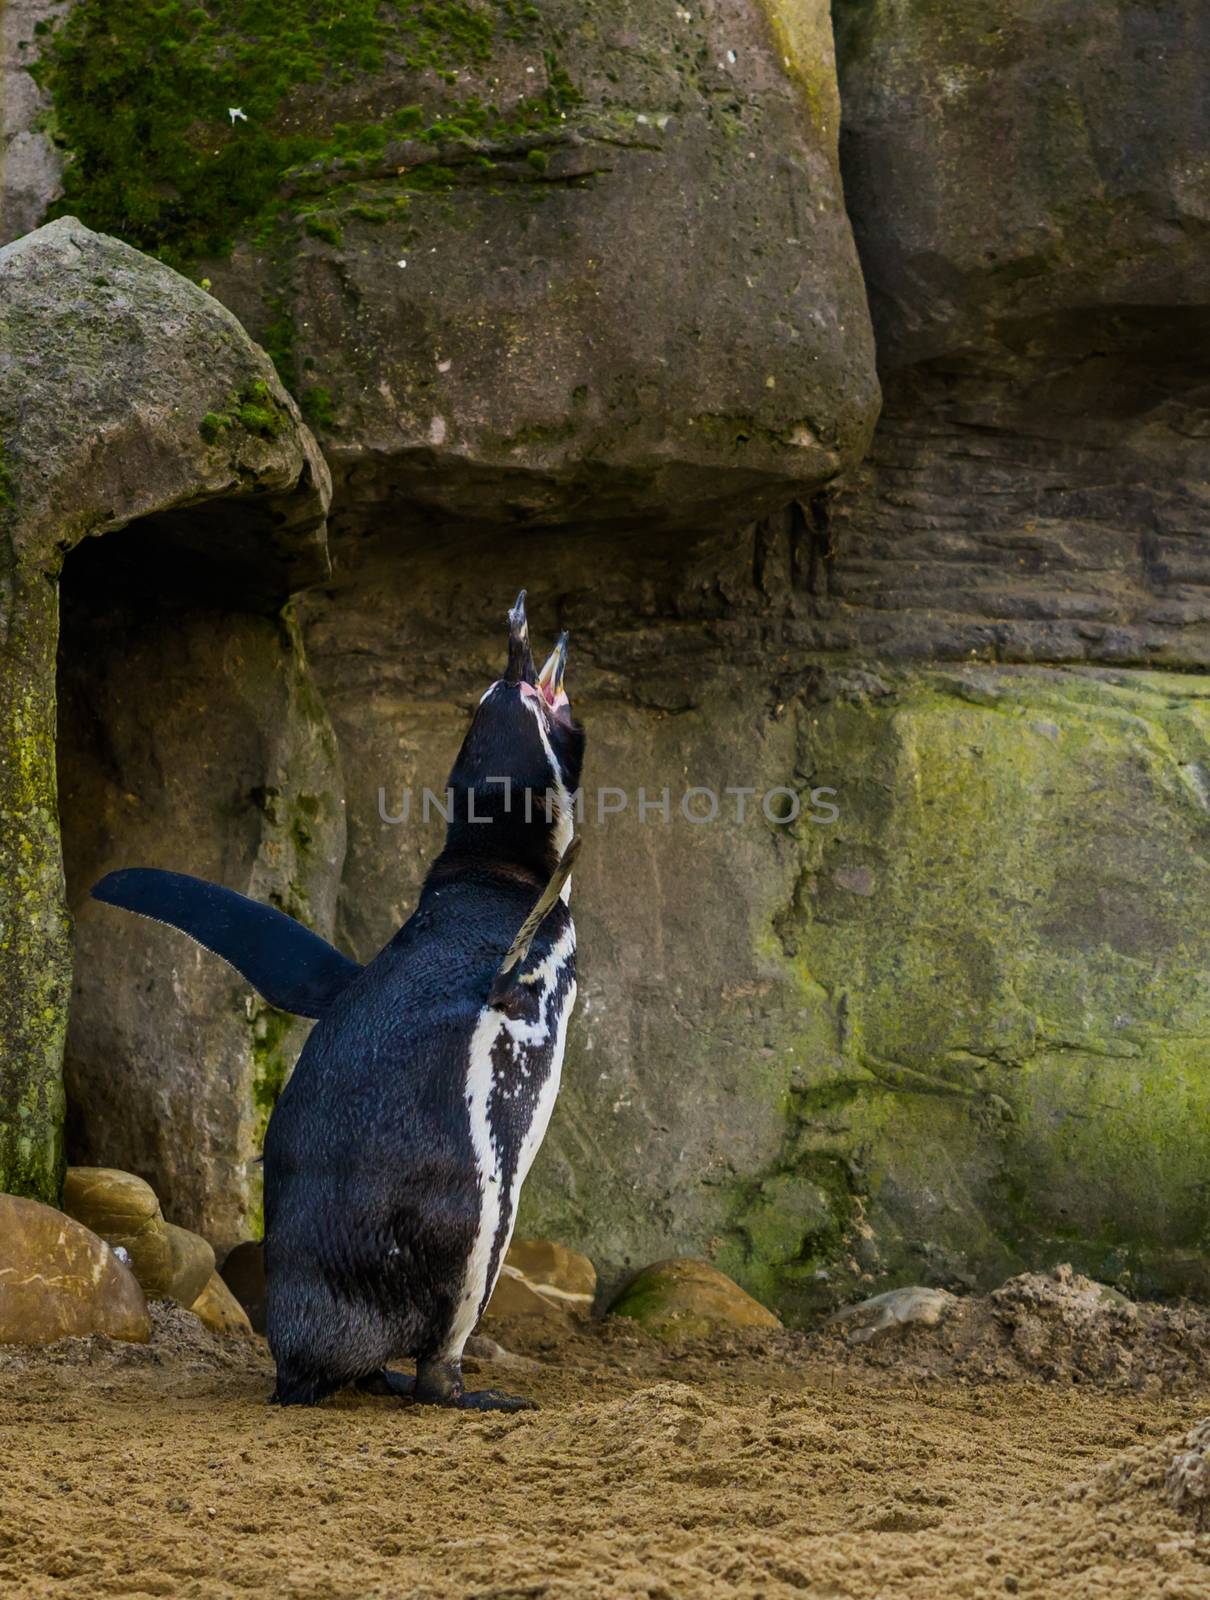 funny humboldt penguin screaming and making a hard sound, waterbird from the pacific coast, threatened animal specie